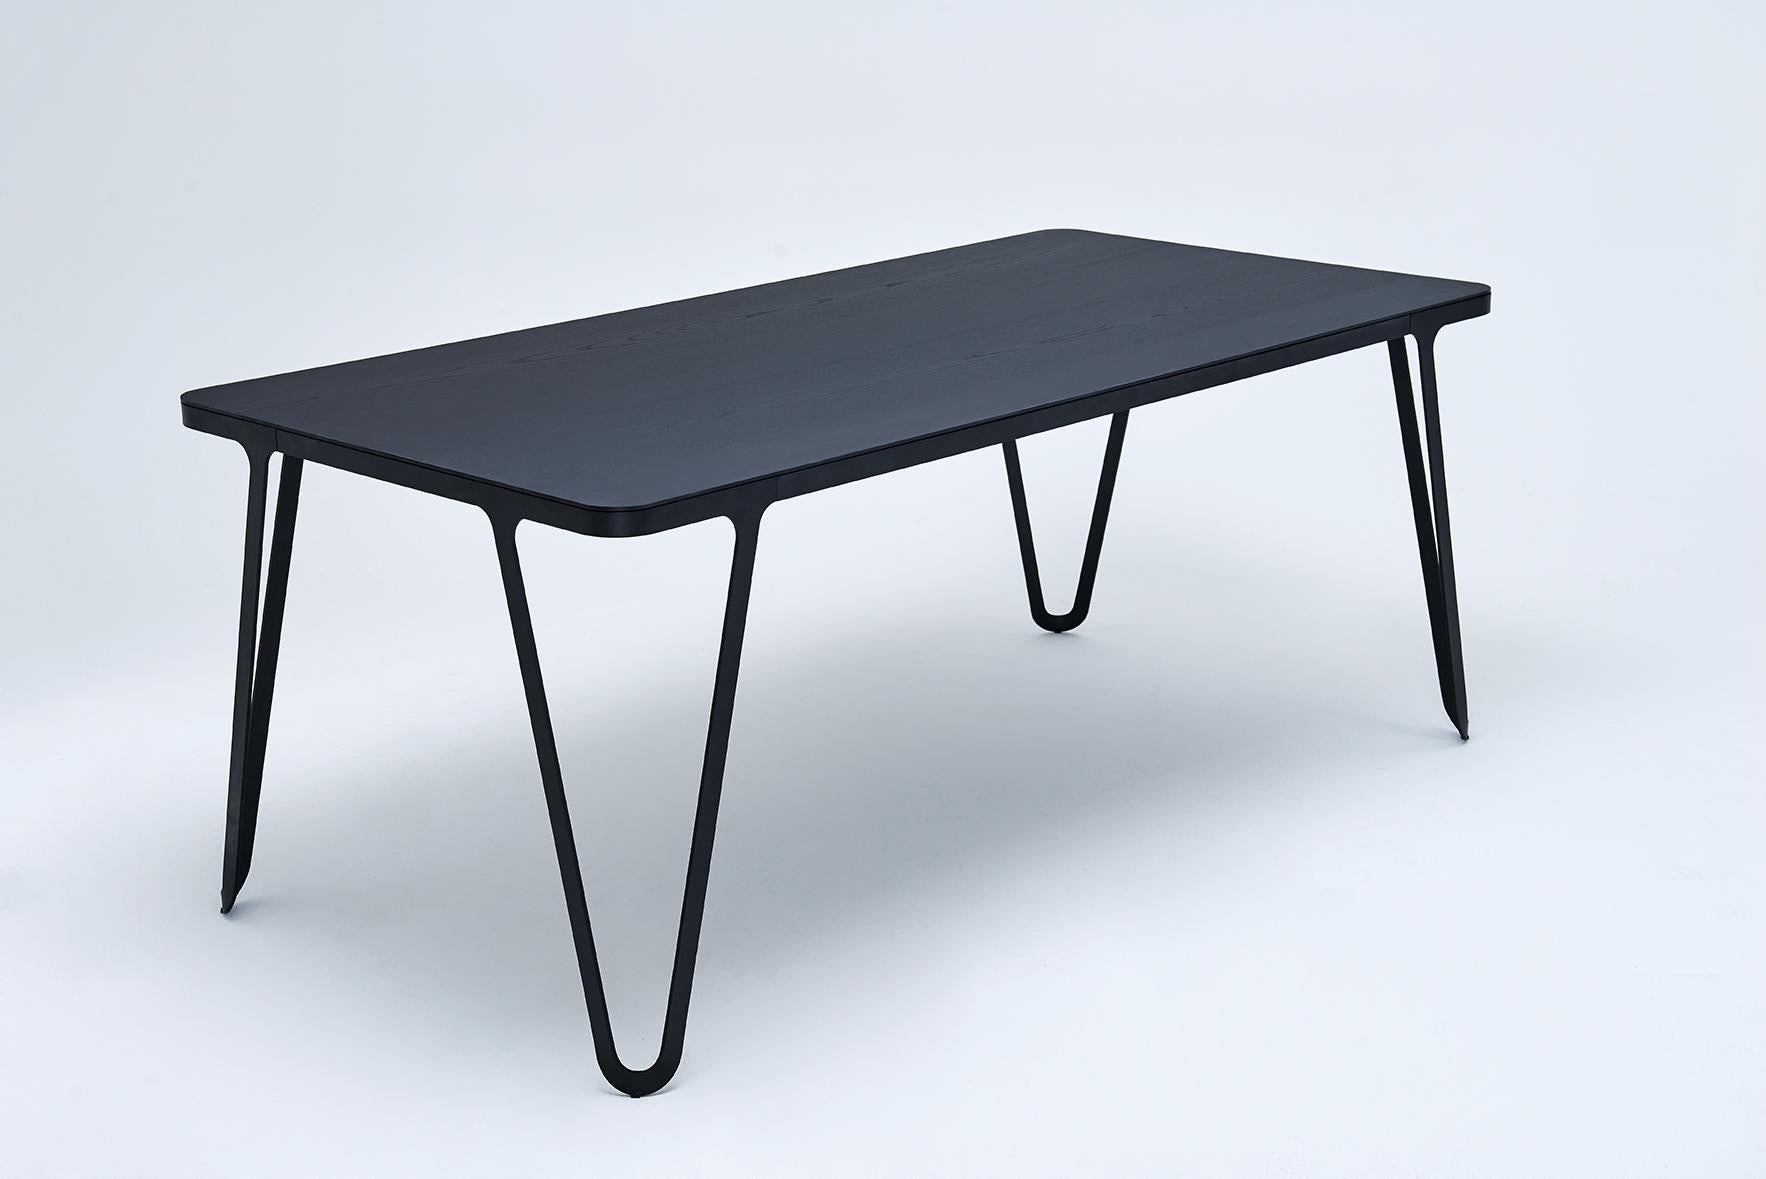 Loop table 200 Ash by Sebastian Scherer
Dimensions: D200 x W90 x H74 cm
Materials: Oak, Aluminium, Wood
Weight: 57.8 kg
Also Available: Colours:Solid wood (matt lacquered or oiled): black and white stained ash / natural oak / american